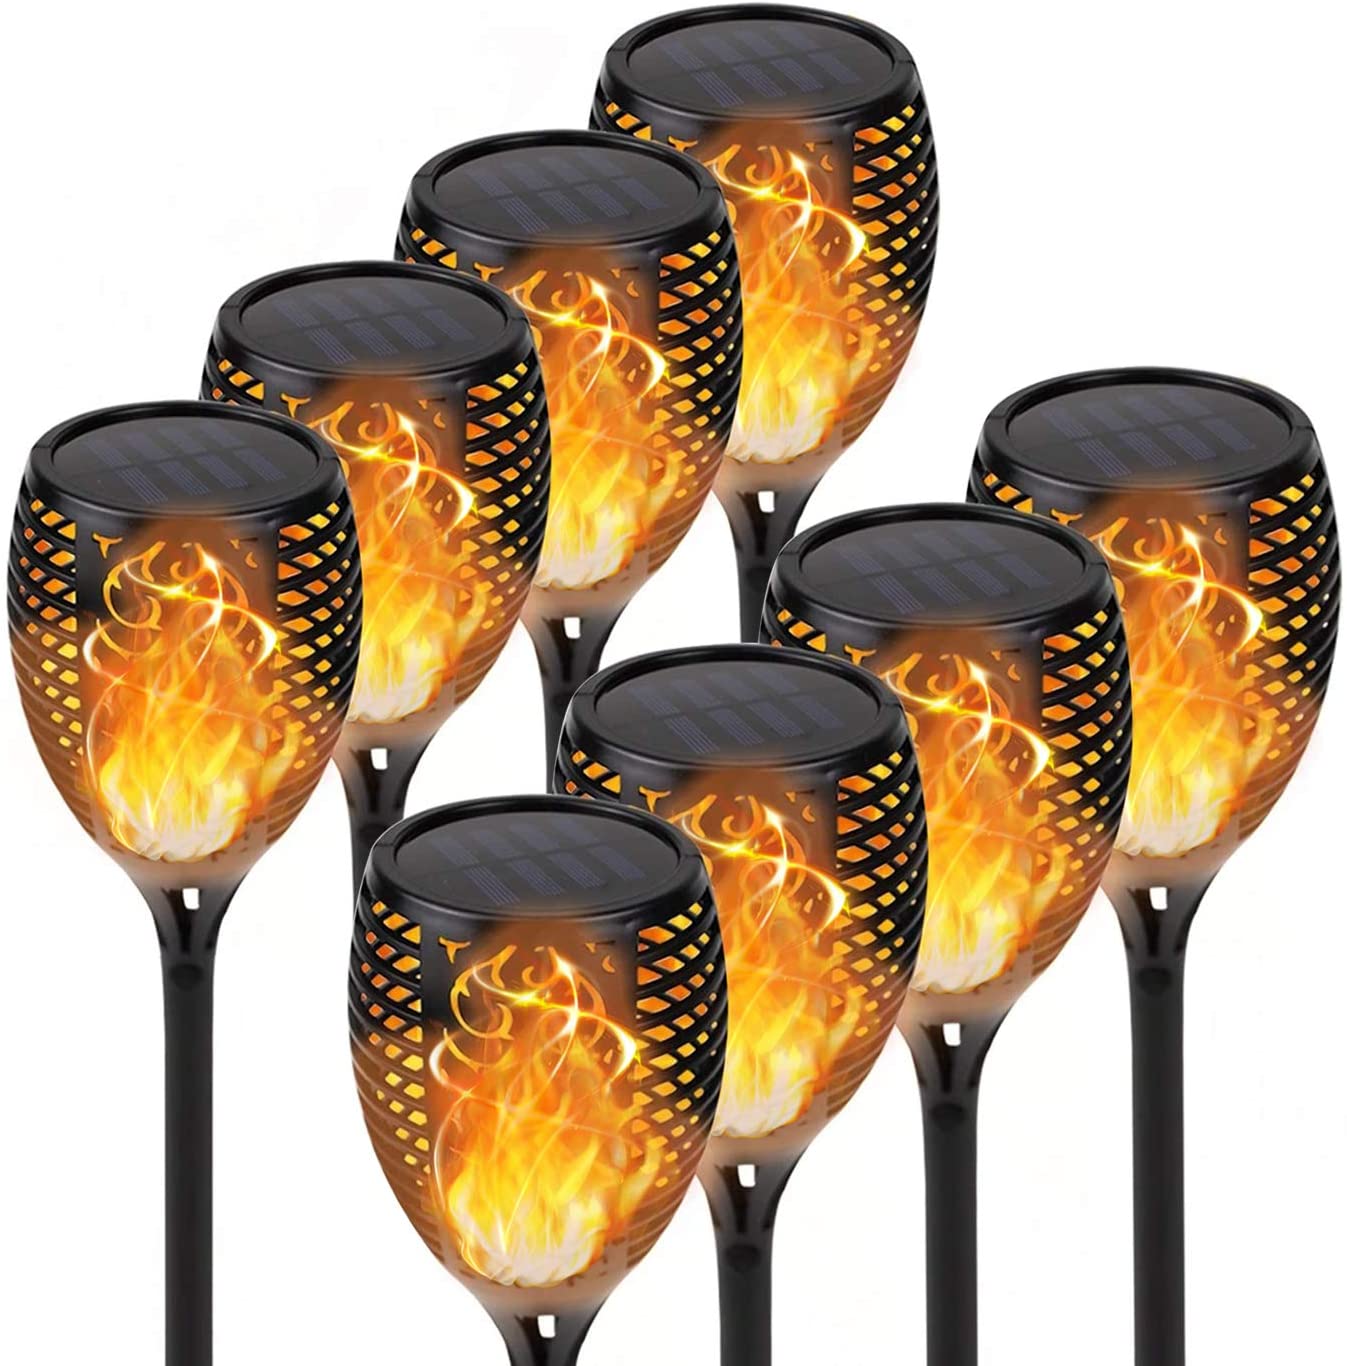 KYEKIO Automatic On/Off Torch Solar Lights, 8-Pack